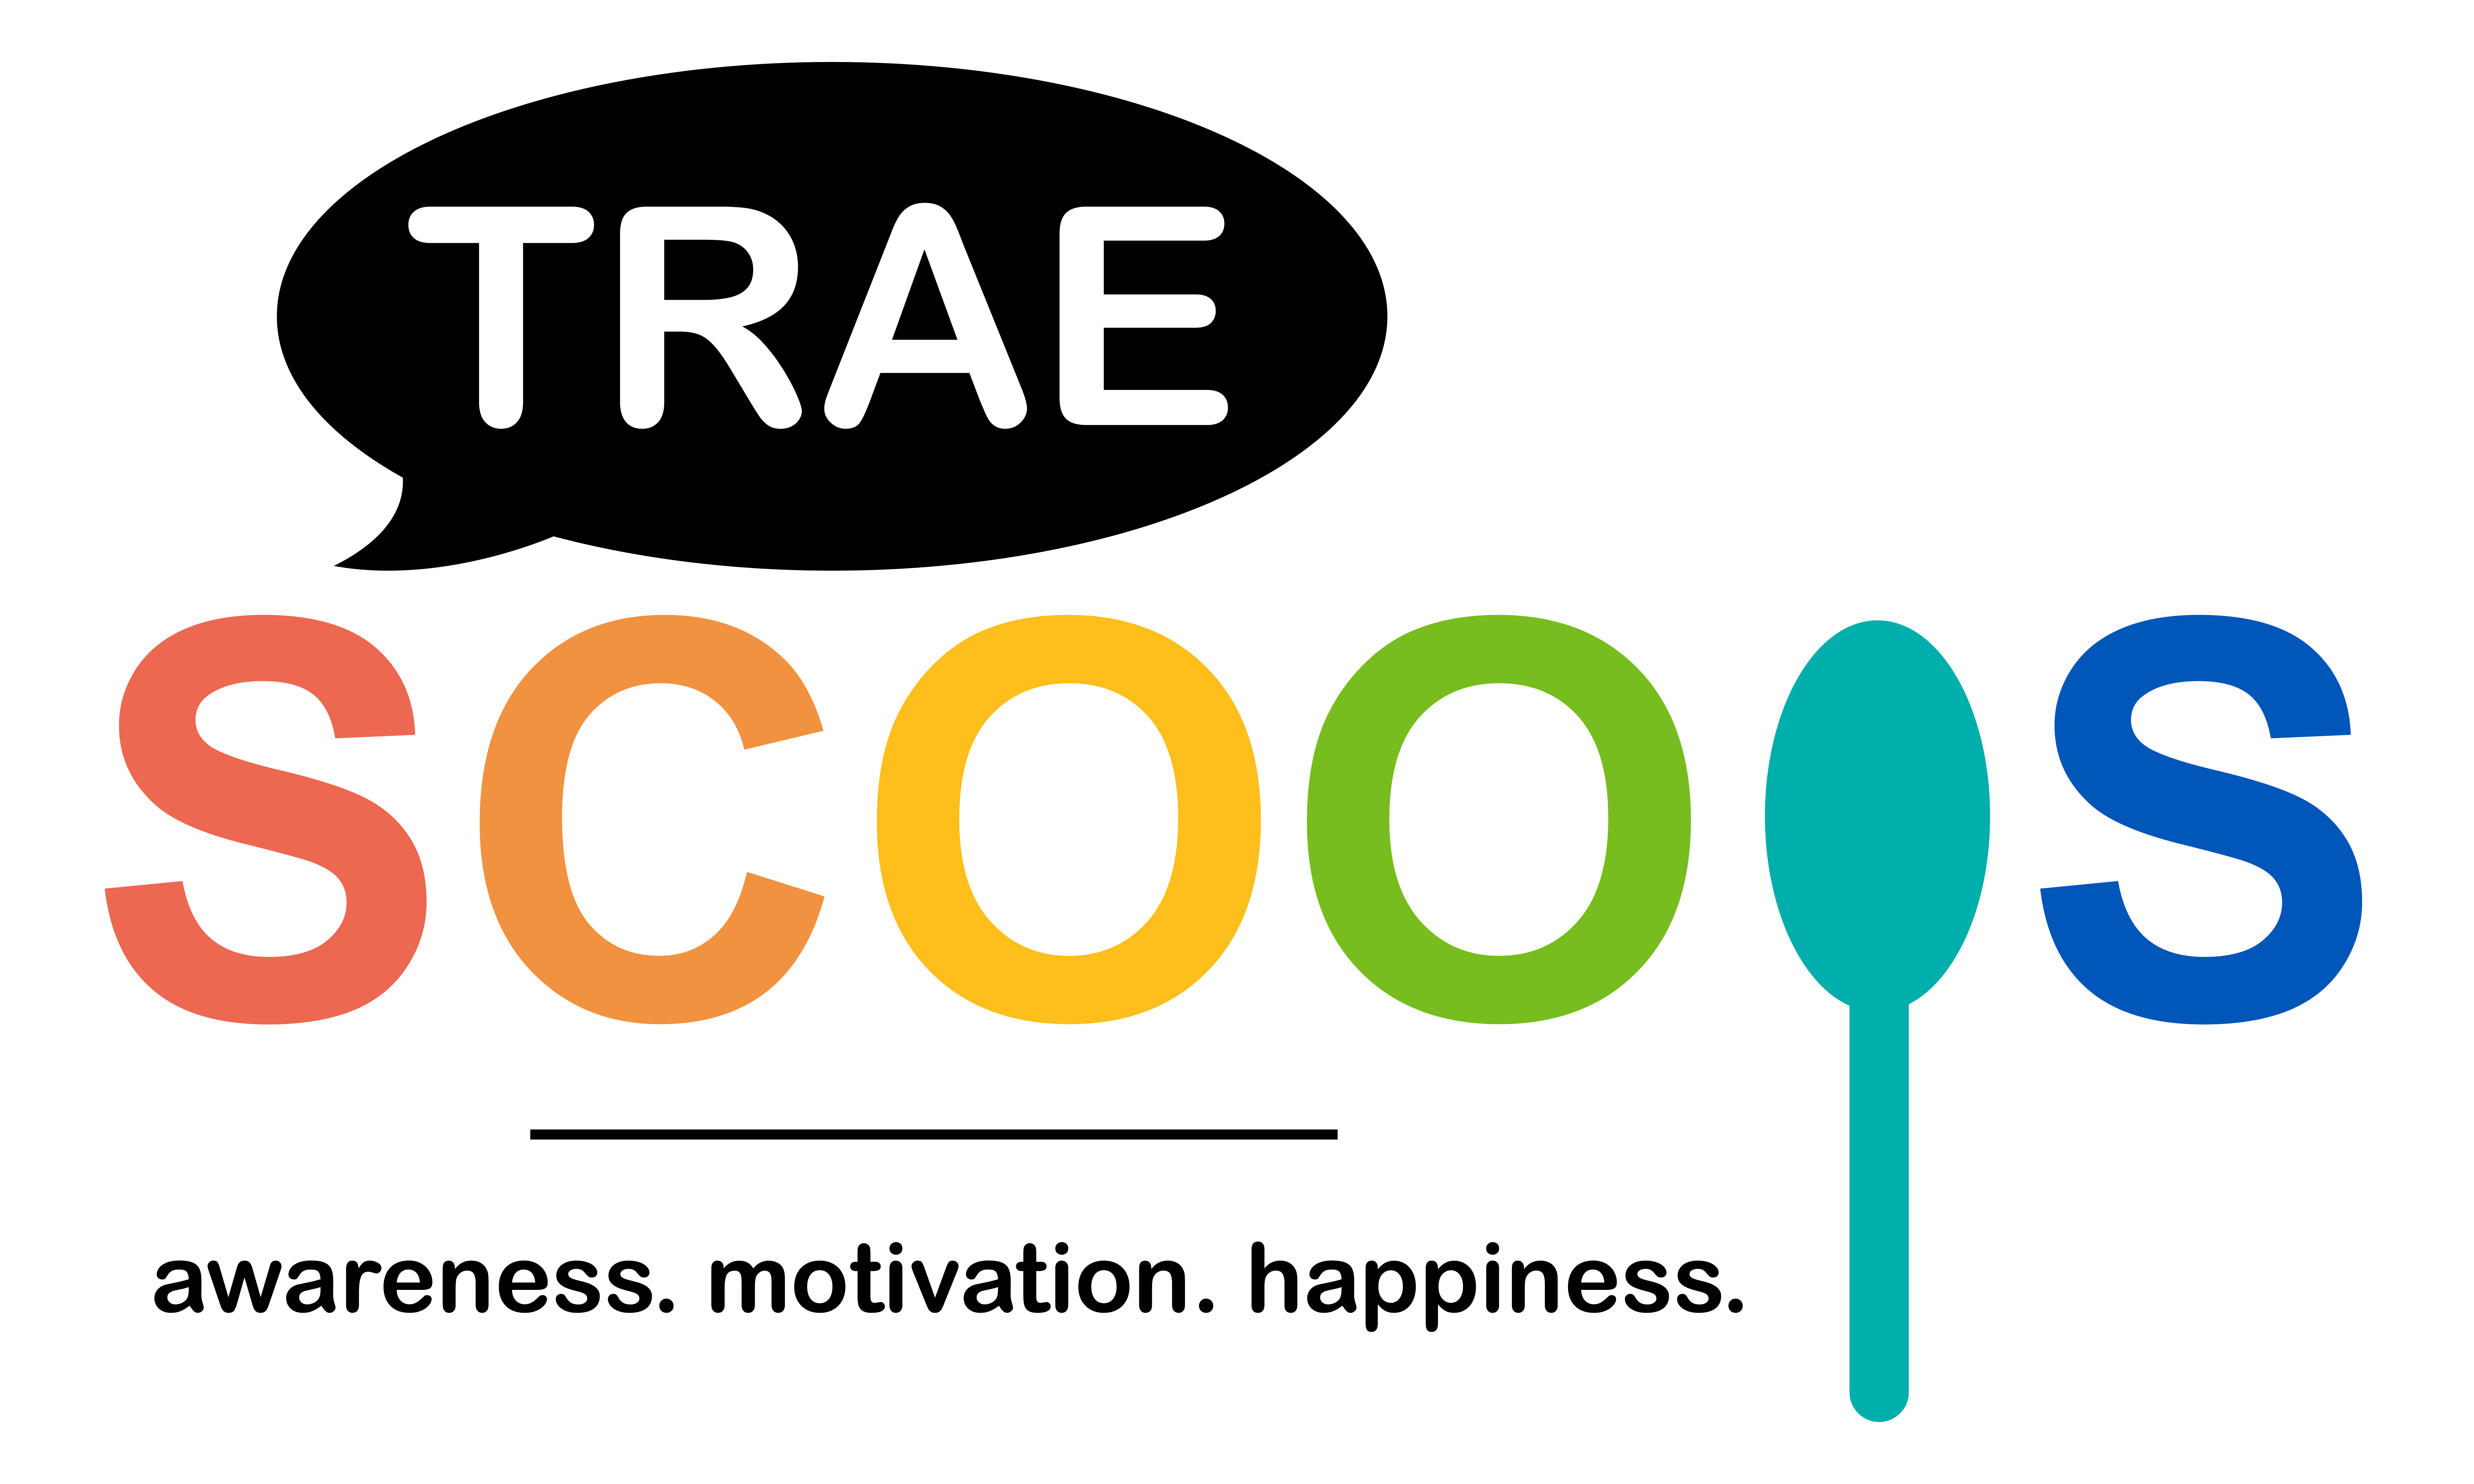 Trae-Scoops-full-color-01 copy